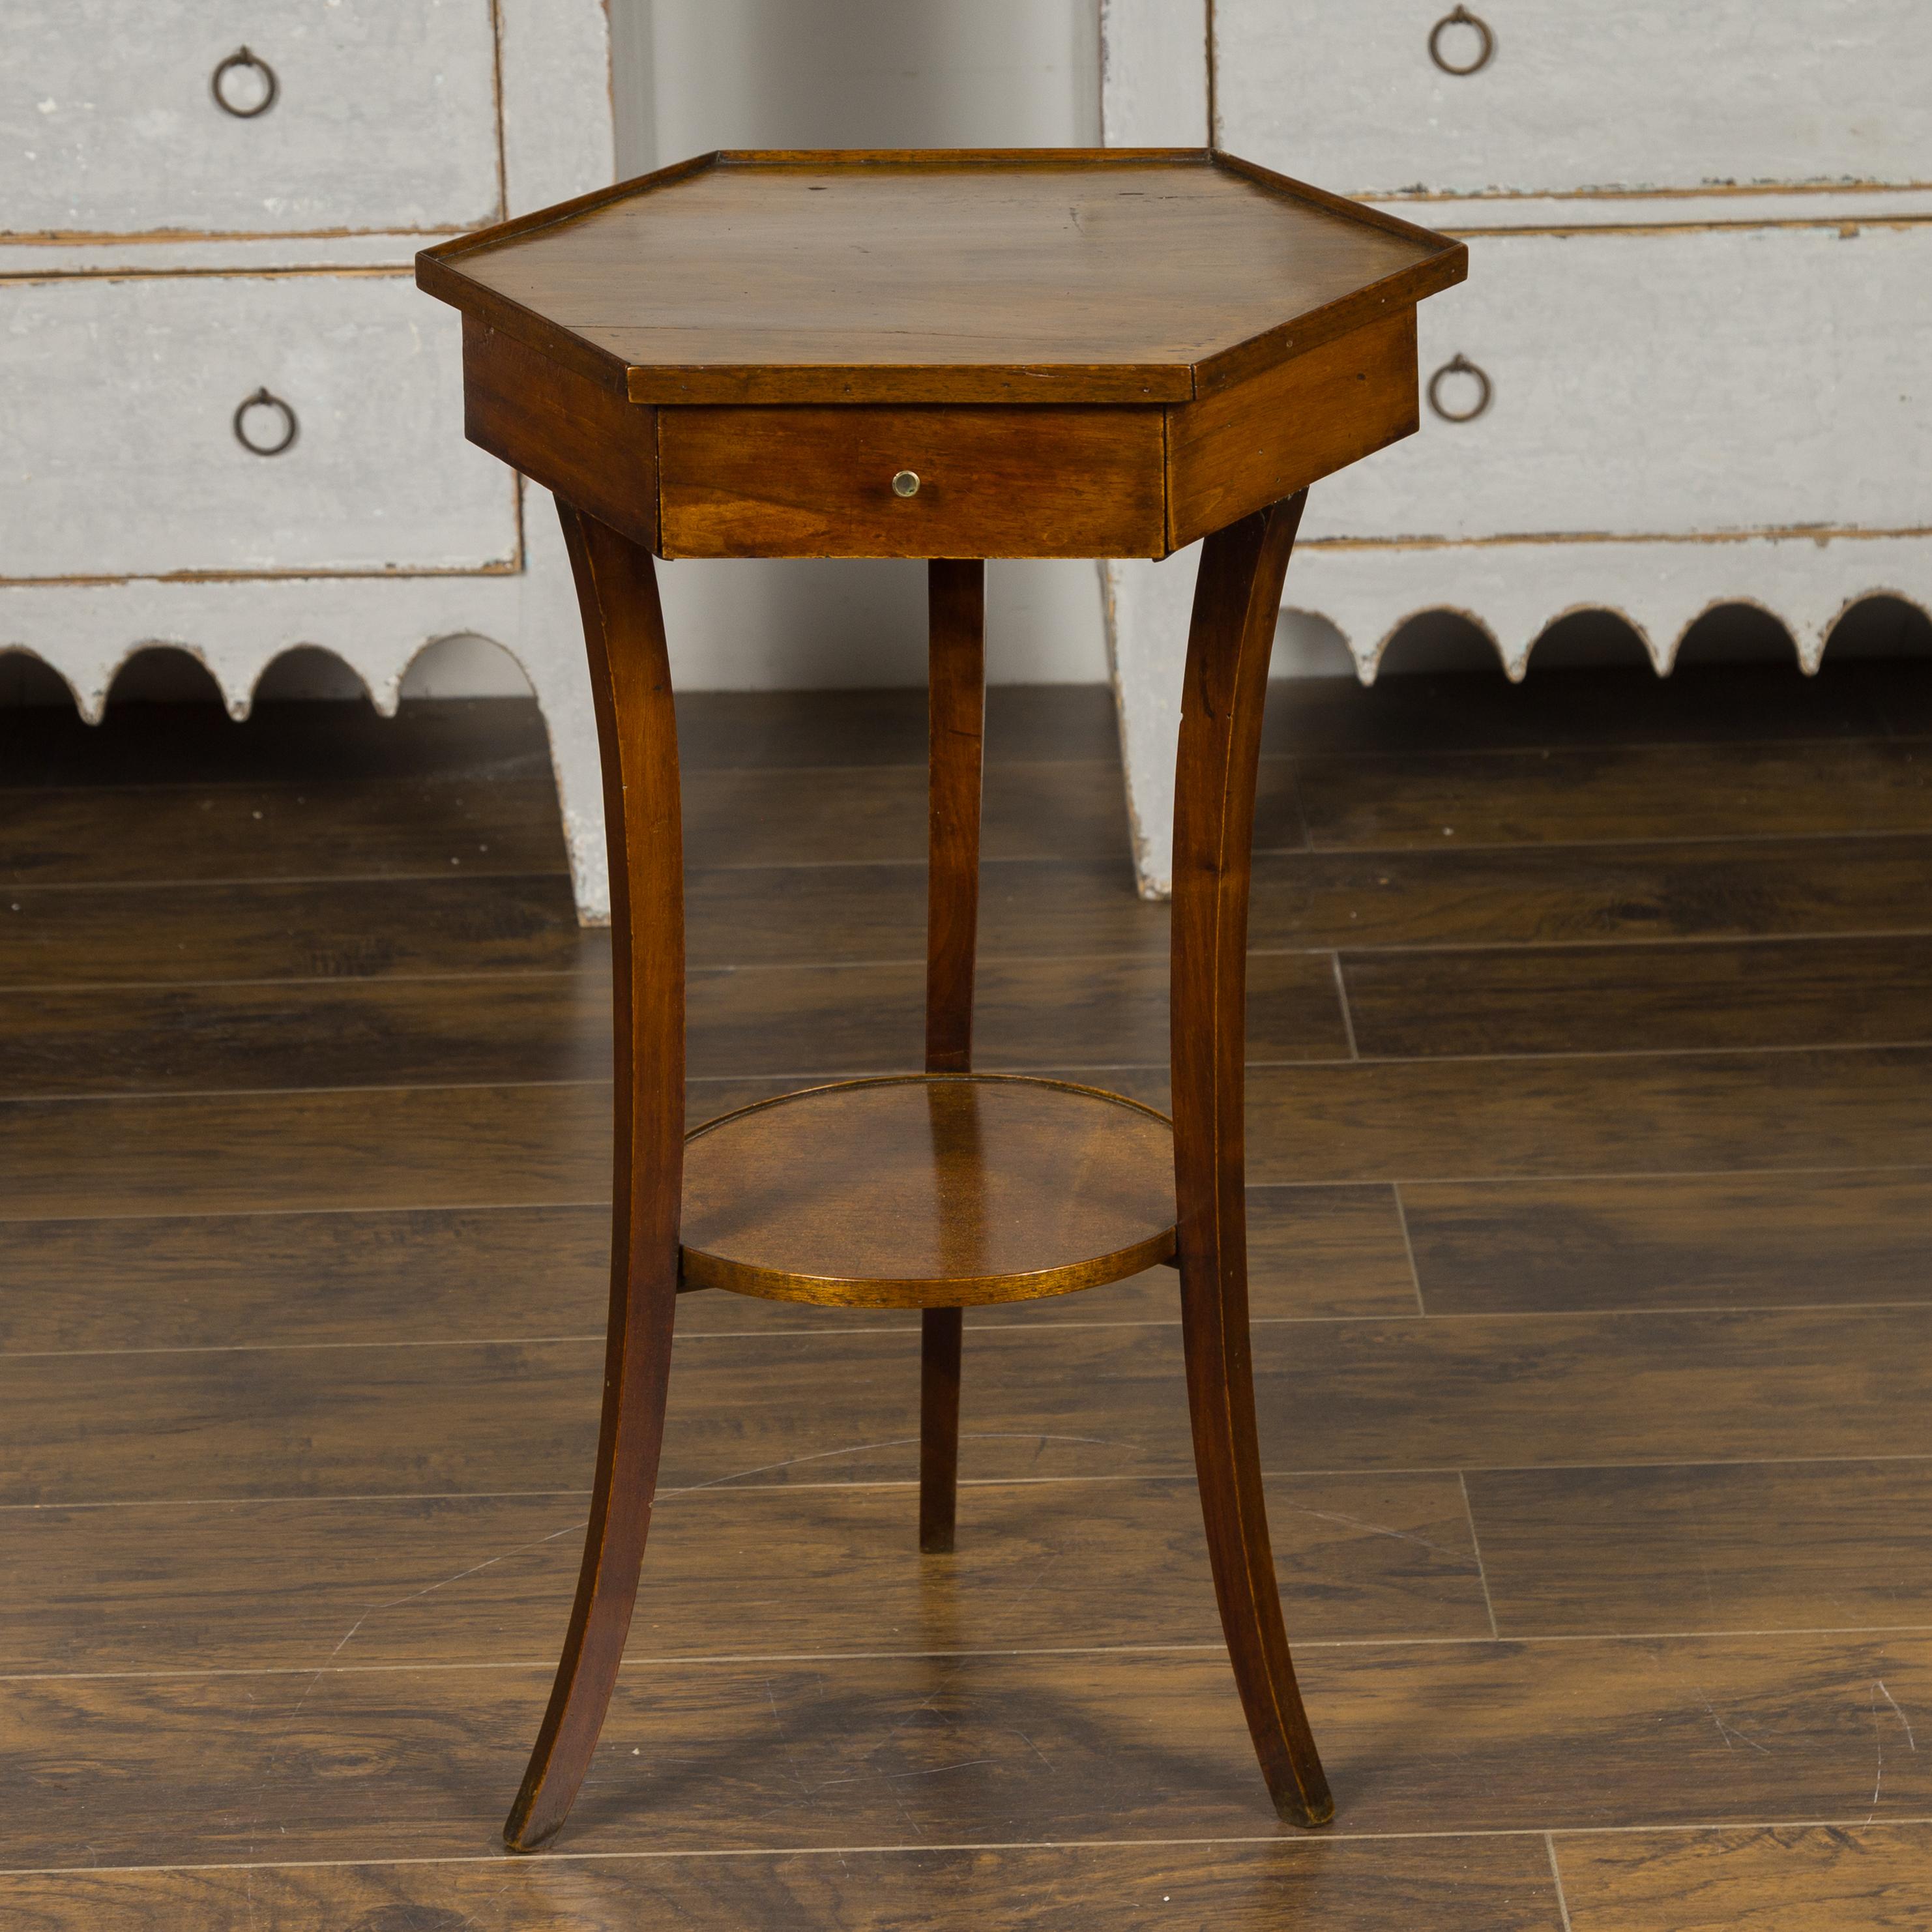 An Italian walnut hexagonal table from the mid 19th century, with single drawer and lower shelf. Born in Italy during the 1850s, this walnut side table features an hexagonal top sitting above a single drawer fitted with a petite brass pull. The